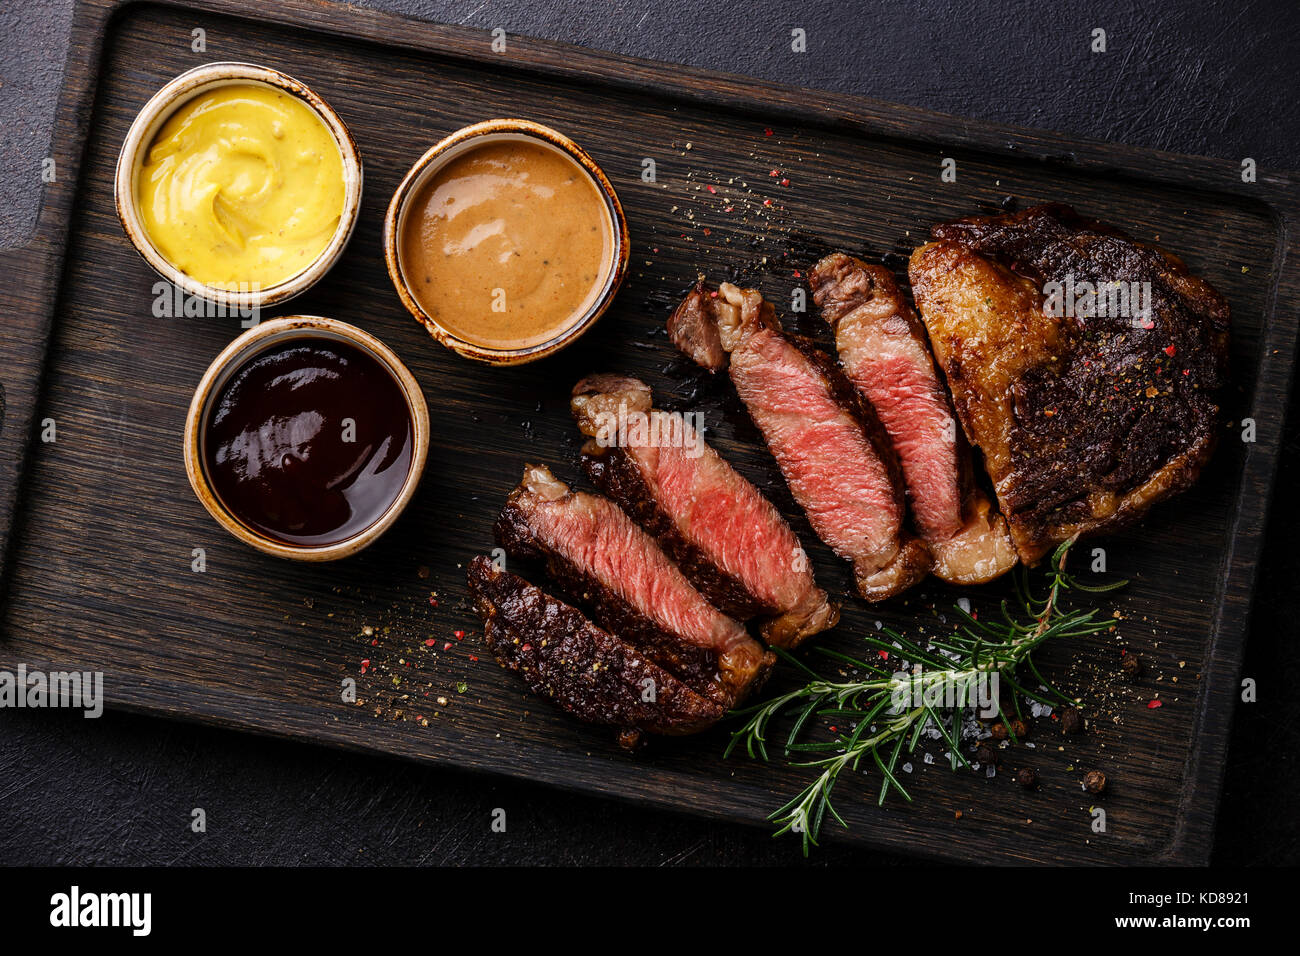 Sliced grilled Rib eye steak and three different sauces: Pepper sauce, Mustard and Barbecue on dark background close up Stock Photo